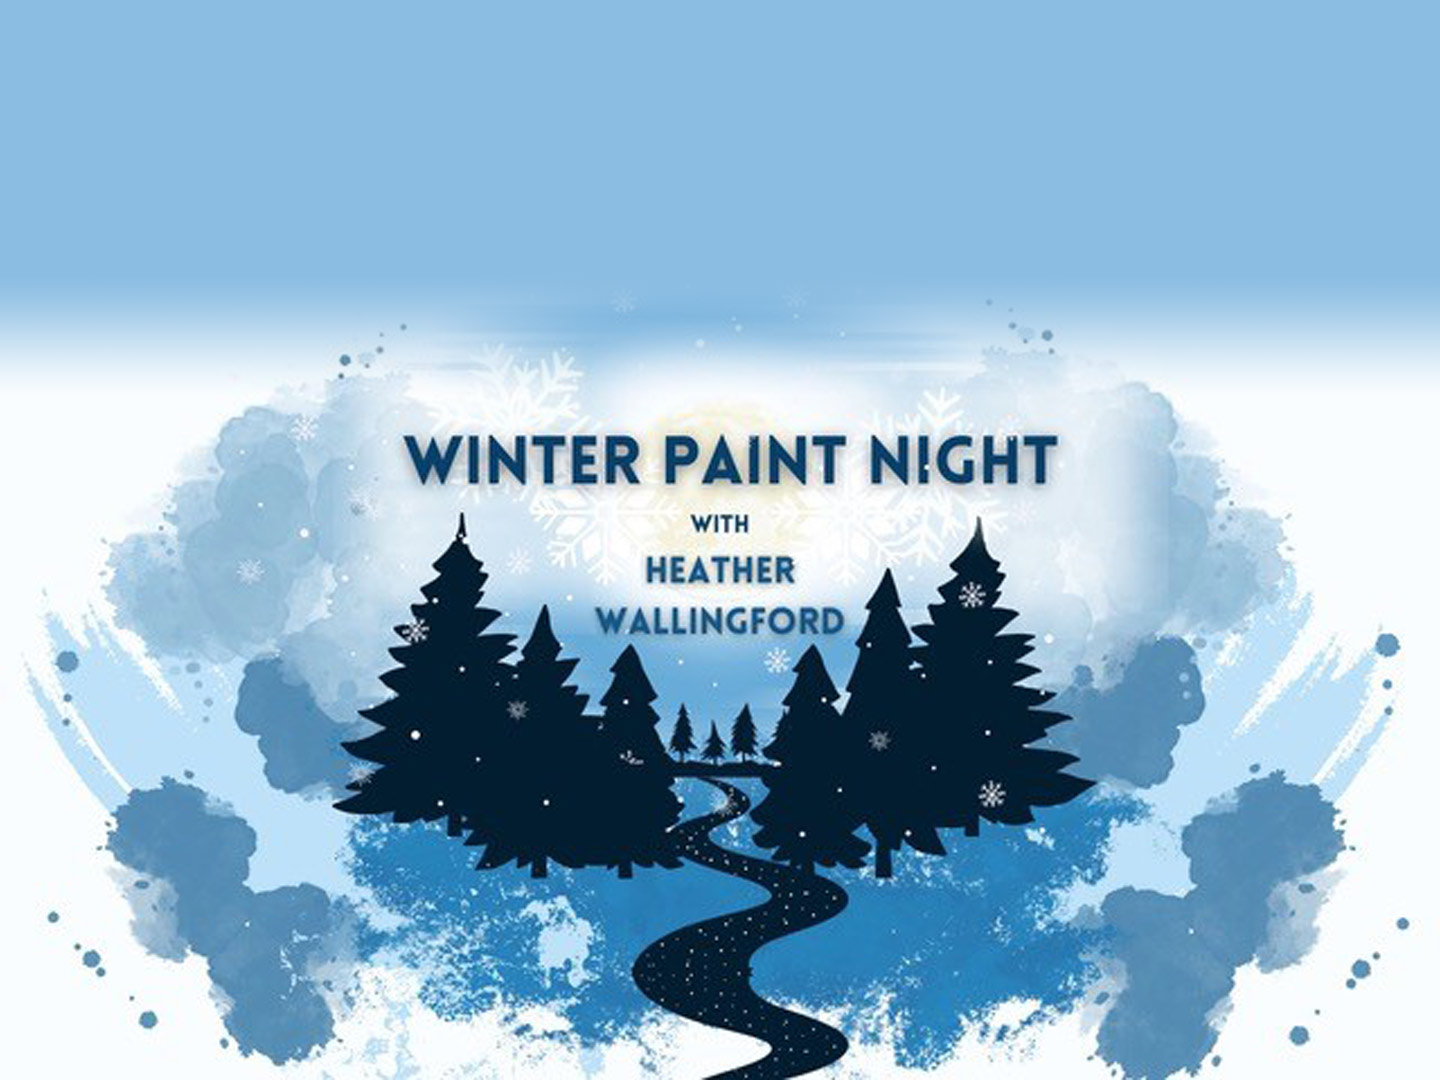 Winter Paint Night with Heather Wallingford